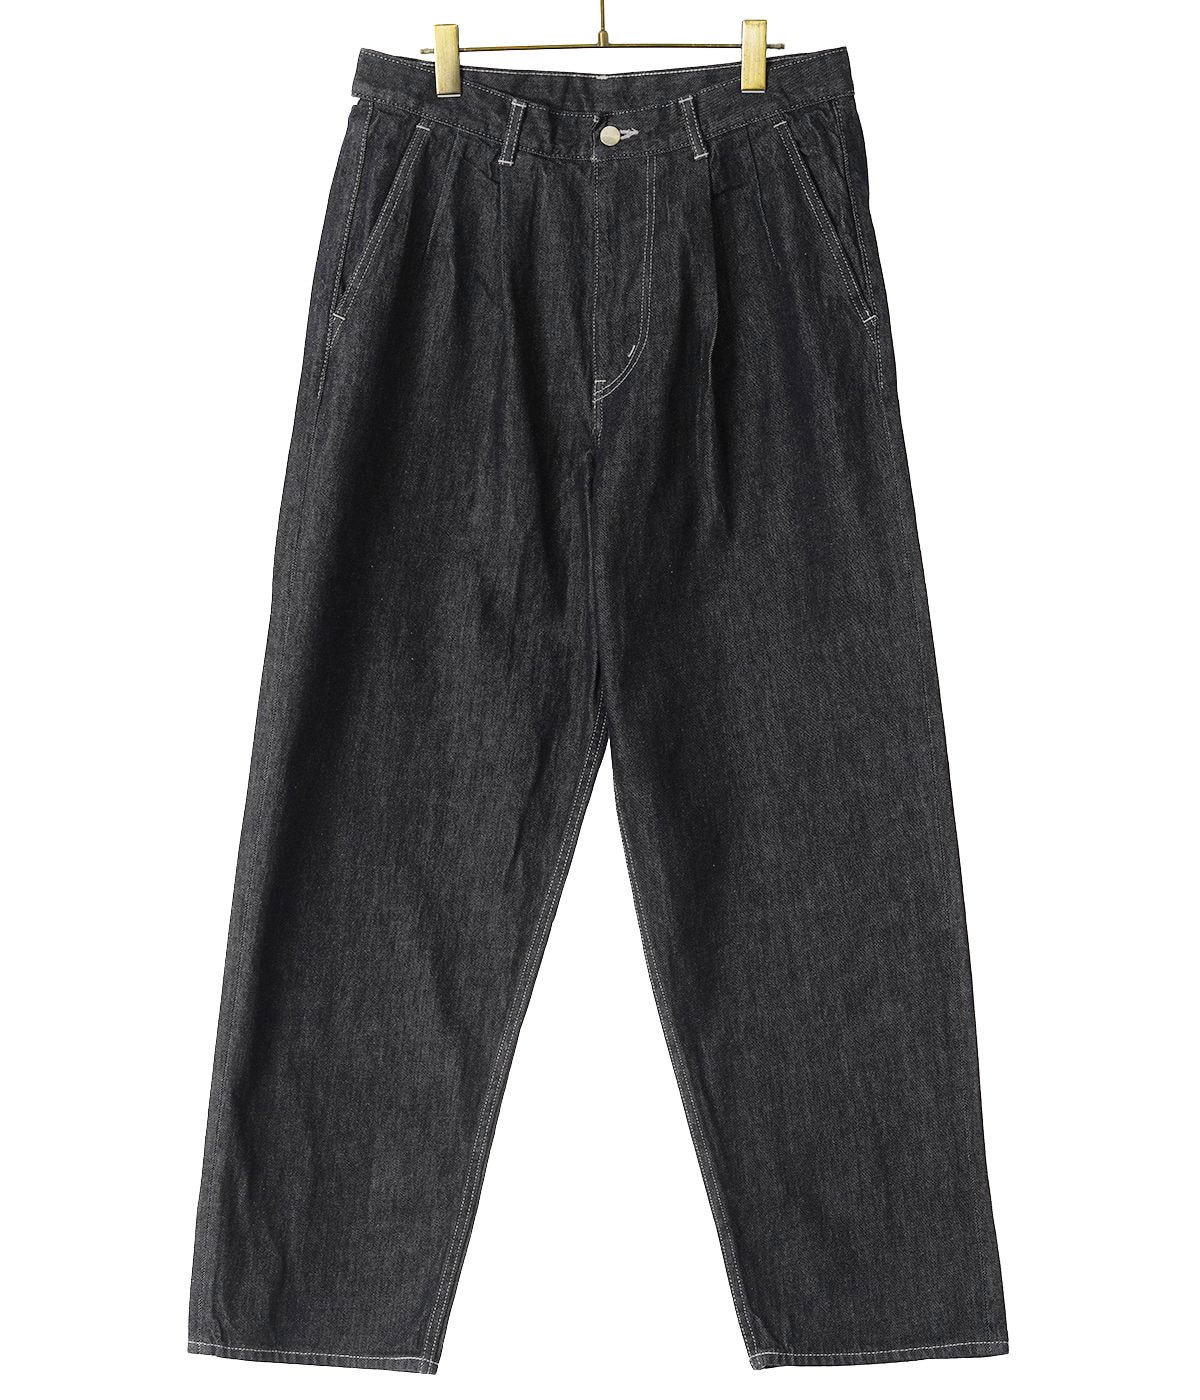 Colorfast Denim Two Tuck Tapered Pants | Graphpaper(グラフペーパー